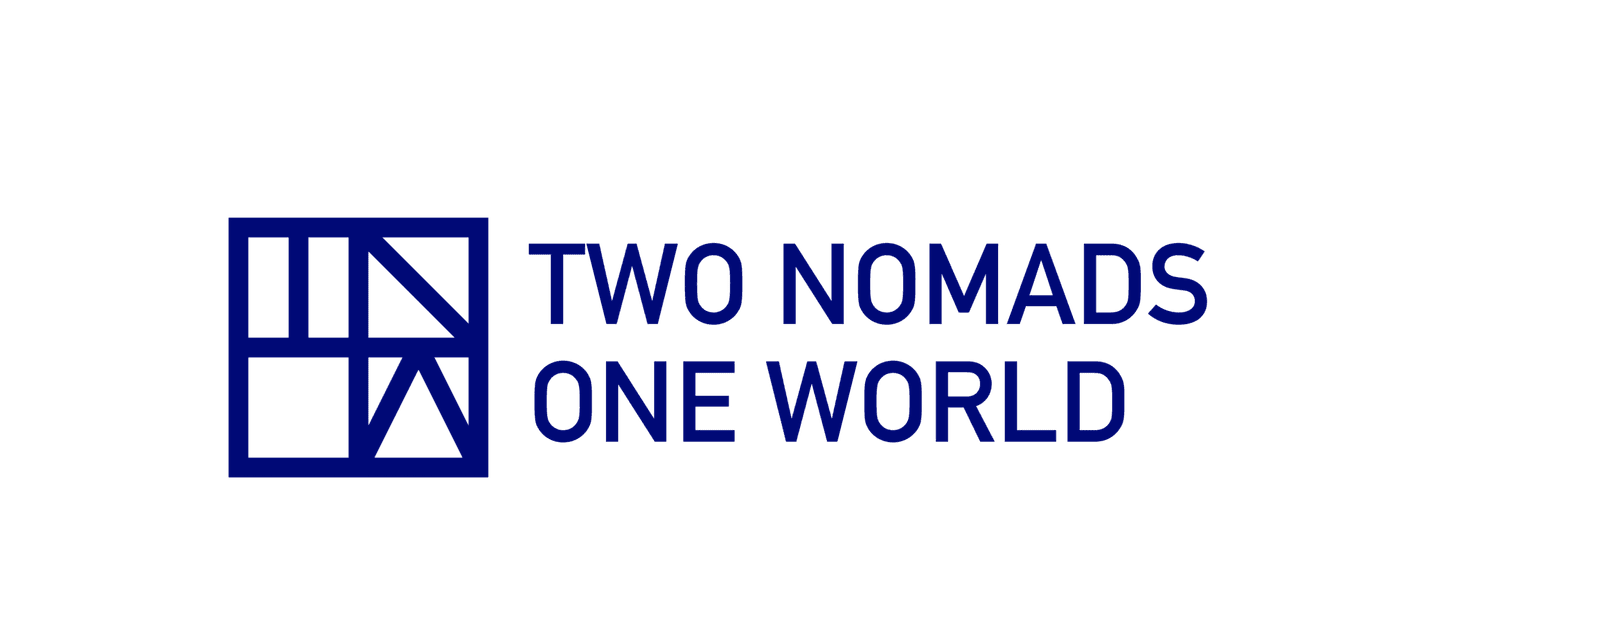 Two Nomads One World | Explore Indochina in 2 weeks, why not? | 2N1W